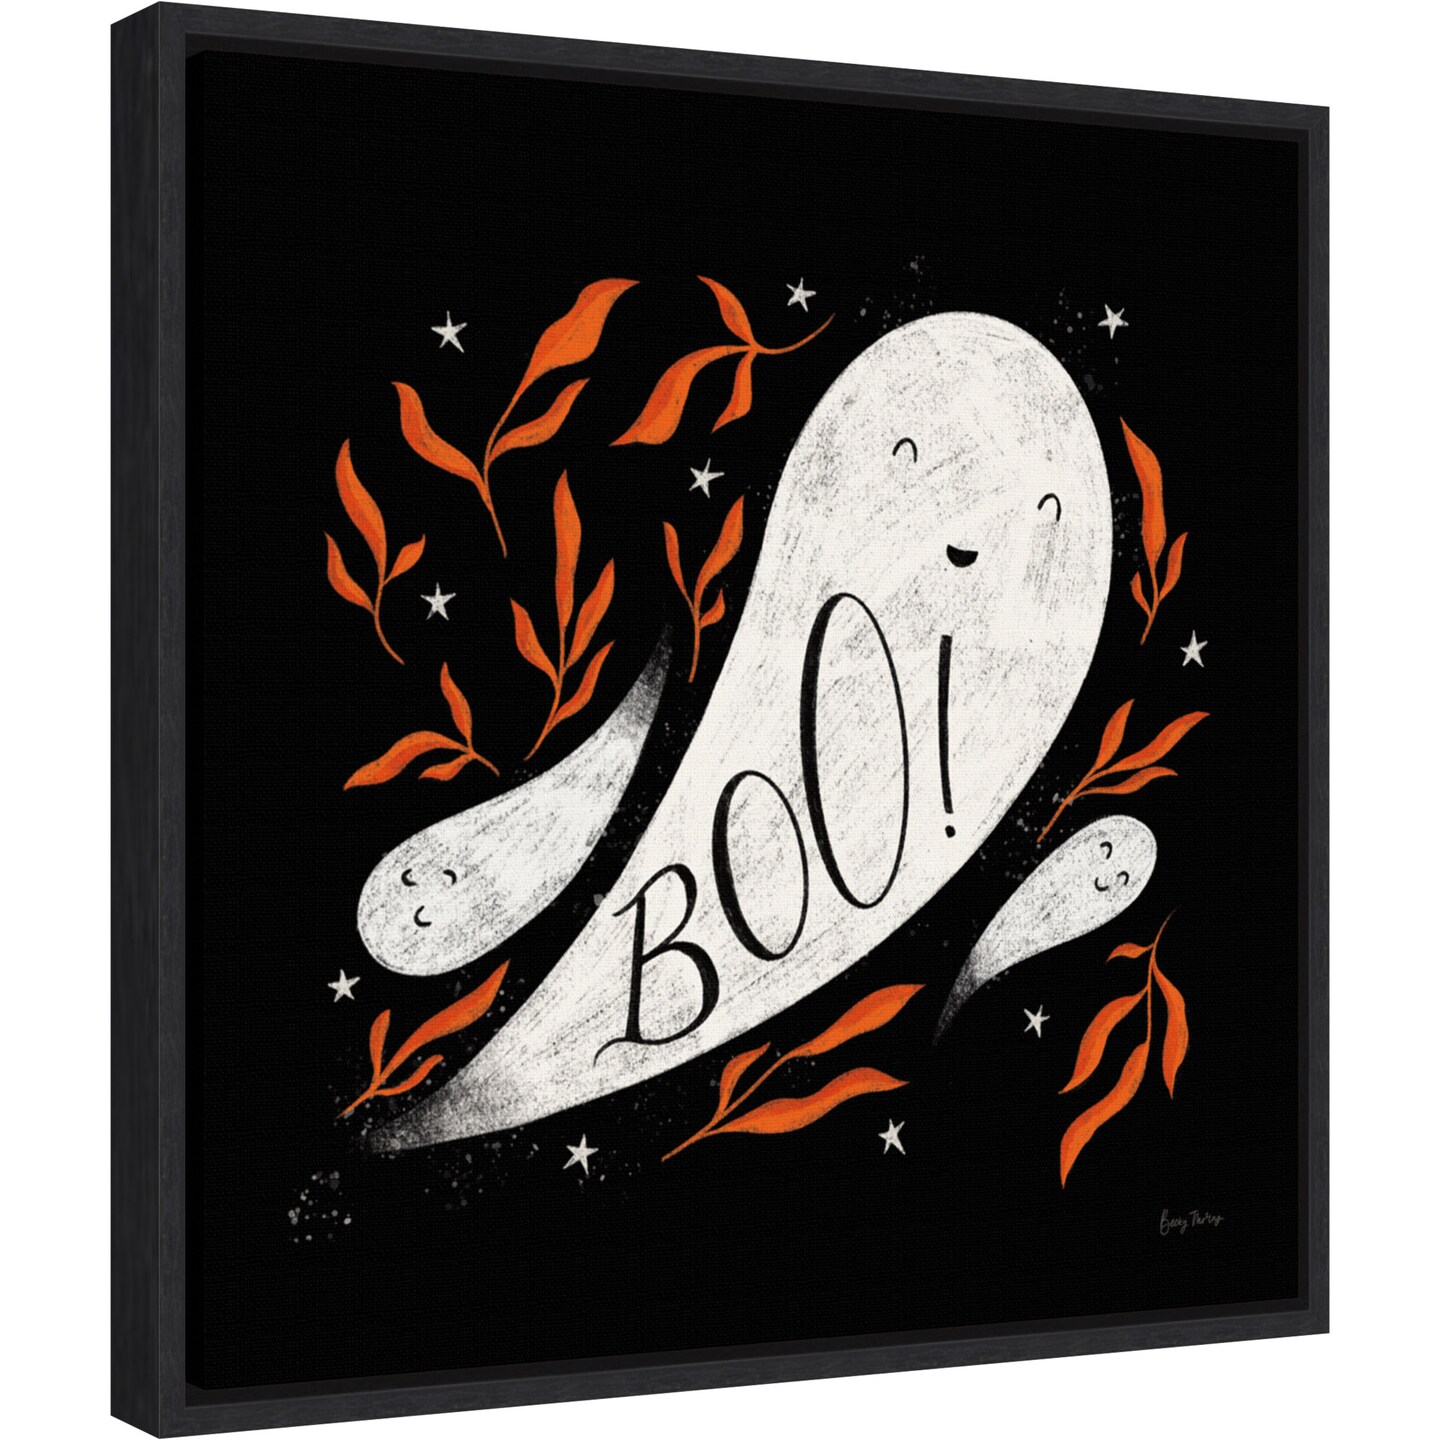 Cute Halloween III by Becky Thorns 16-in. W x 16-in. H. Canvas Wall Art Print Framed in Black